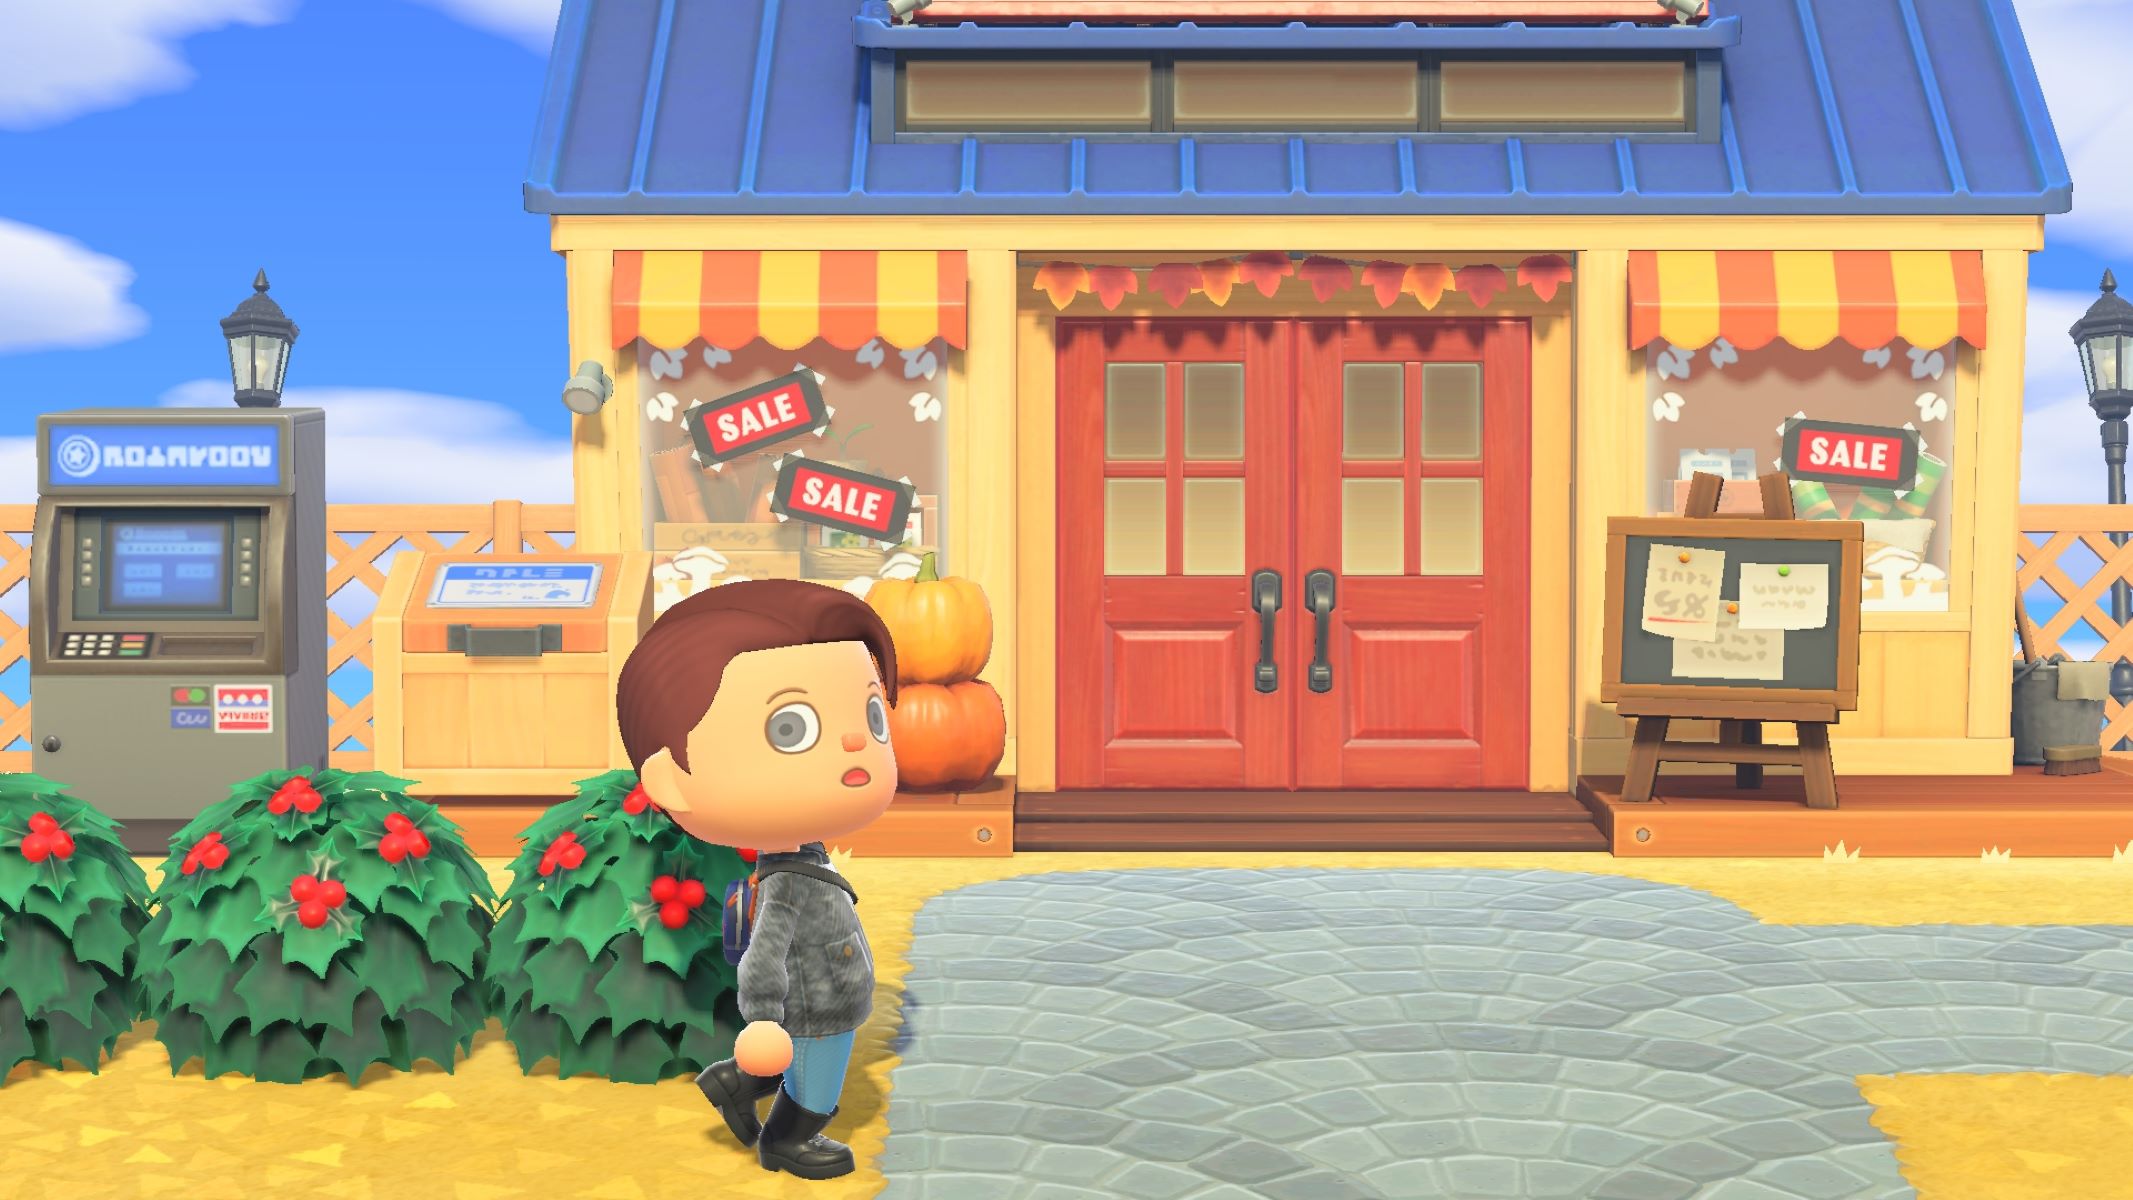 Change Your Name In Animal Crossing: New Horizons Without Resetting Your Island!